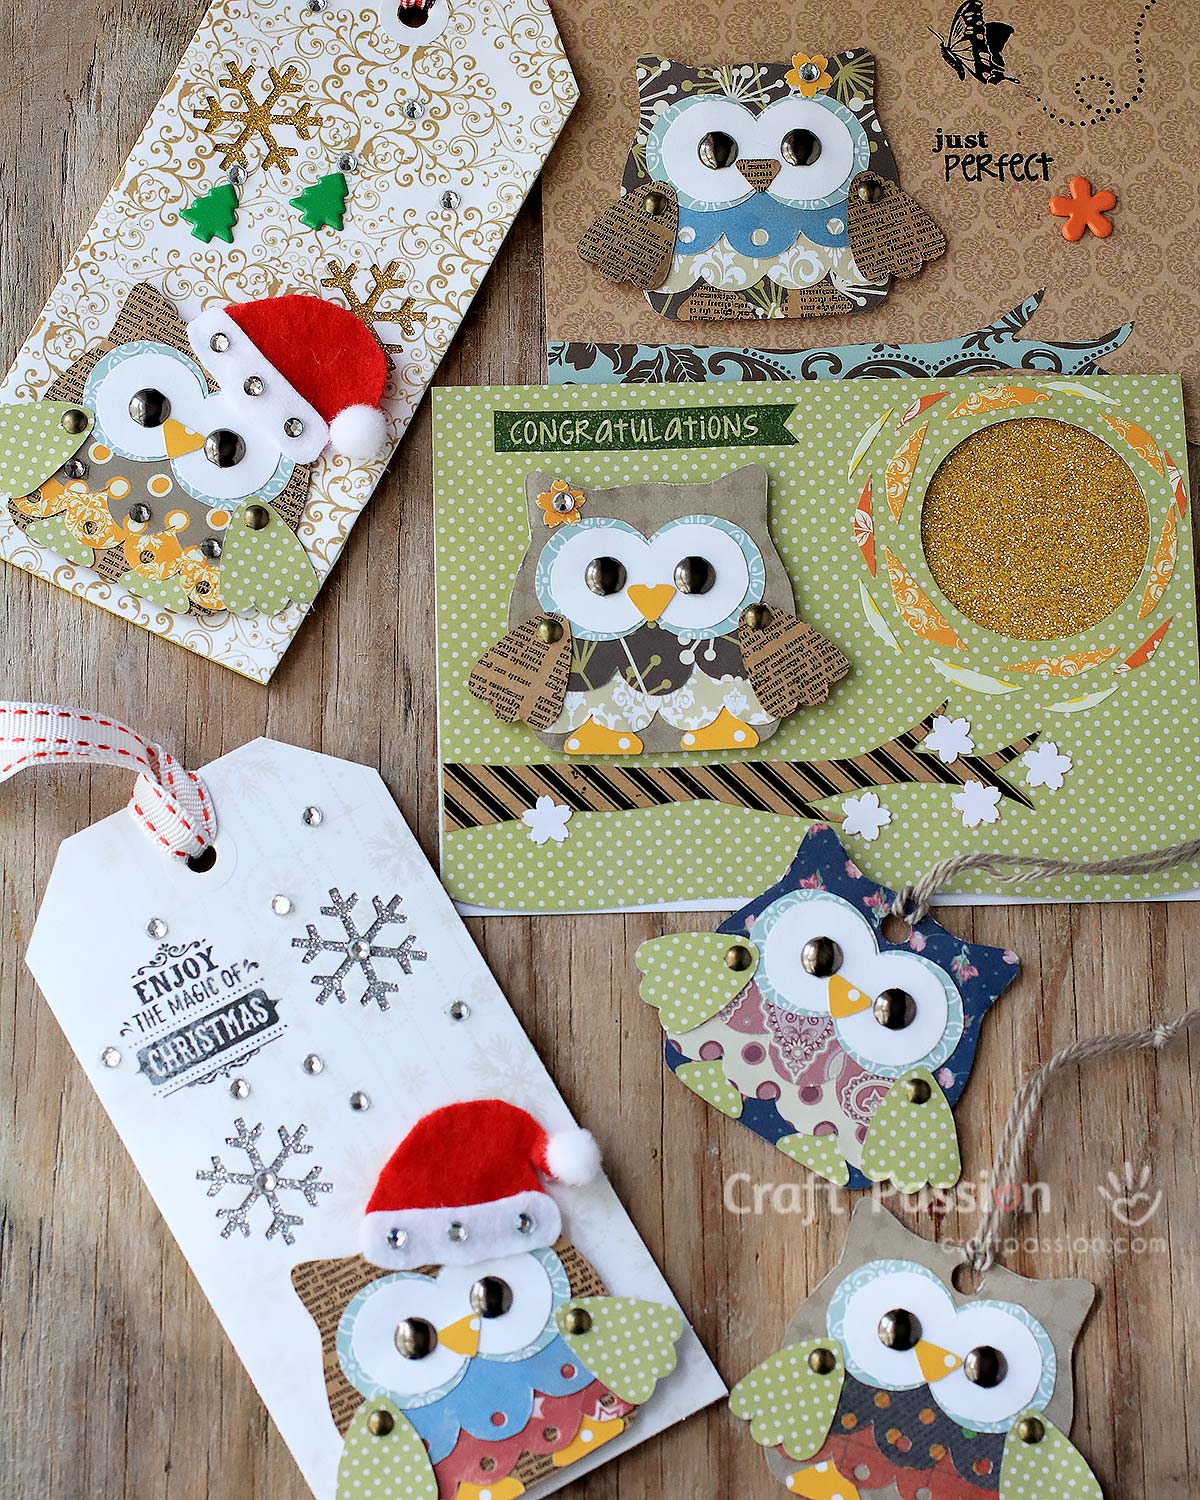 Universal owl pattern for card, scrapbooking, appliqué patchwork, sew into felt/leather charm. Enlarge pattern to sew into soft toy and other projects.